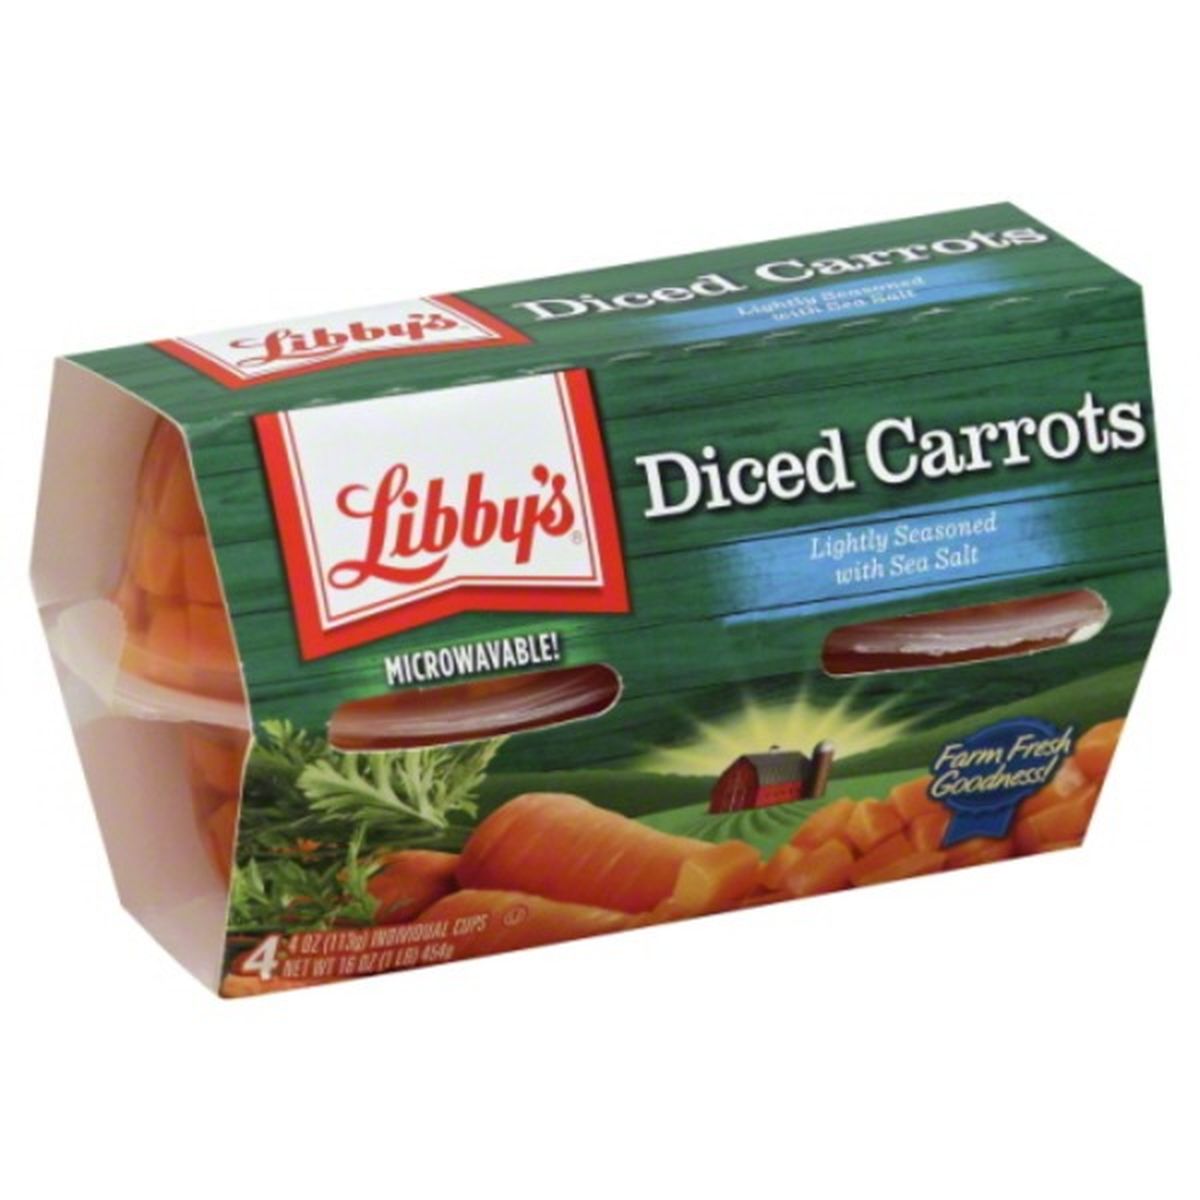 Calories in Libby's Carrots, Diced